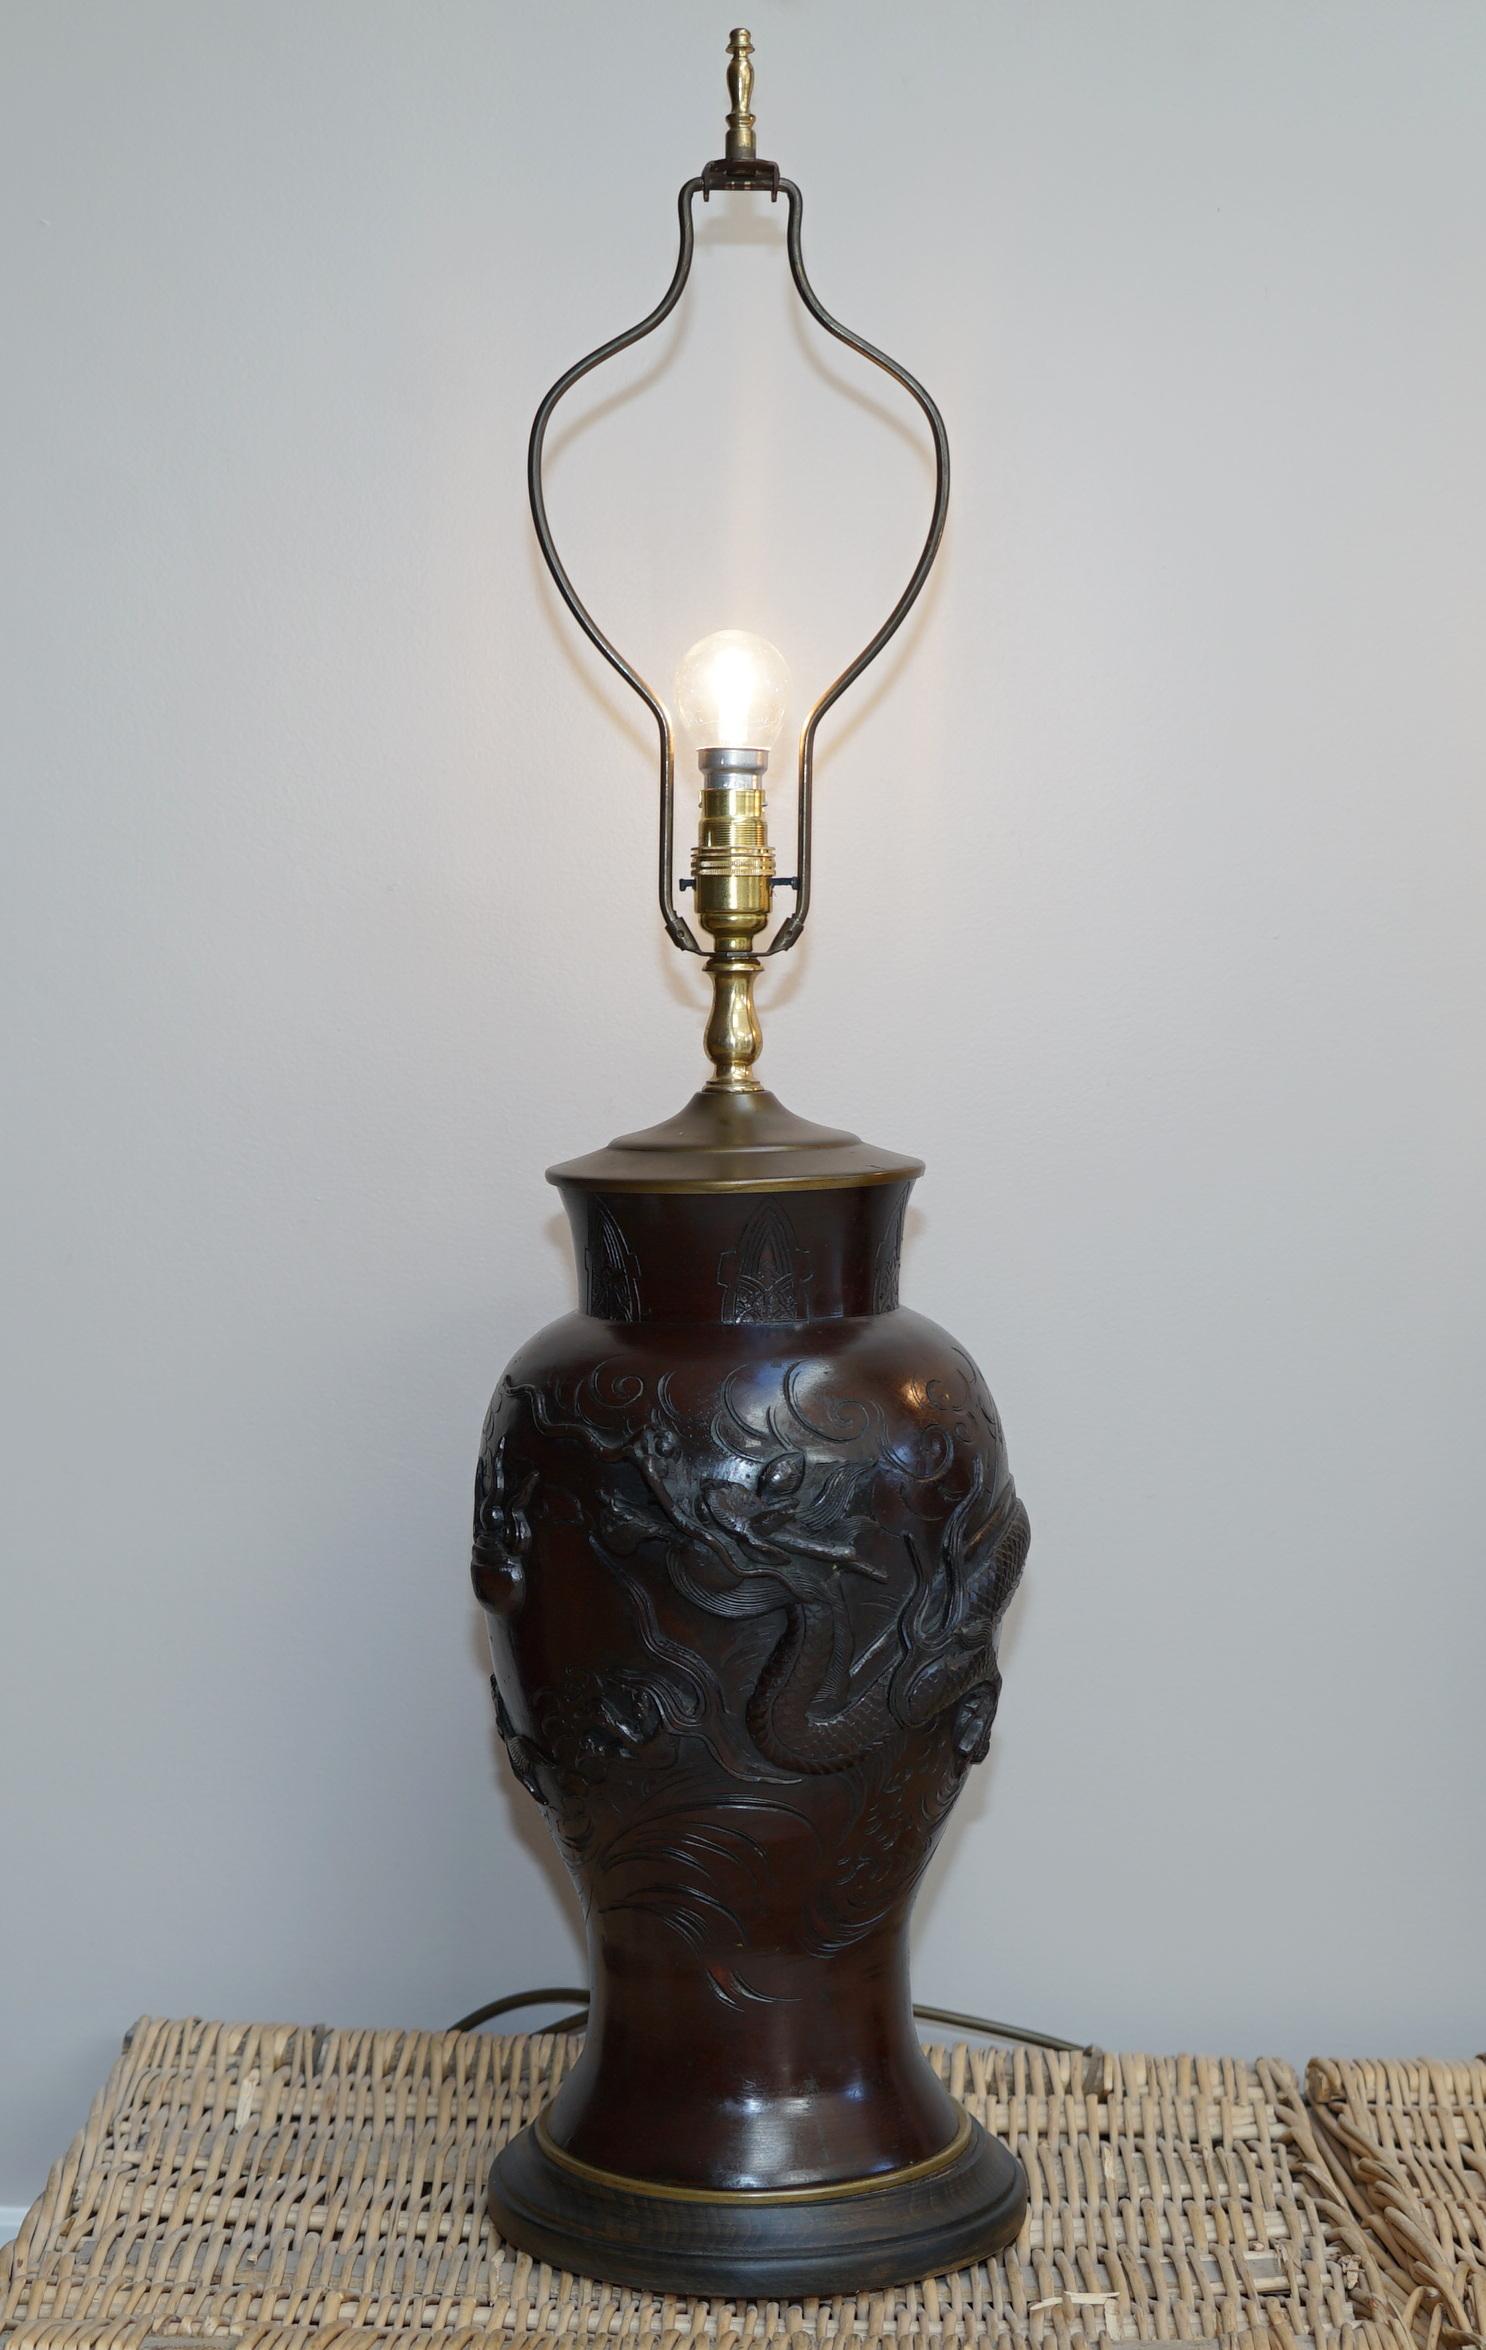 Wimbledon-Furniture

Wimbledon-Furniture is delighted to offer for sale this stunning pair of original circa 1900 Chinese Export Dragon lamps in bronze with timber bases

Please note the delivery fee listed is just a guide, it covers within the